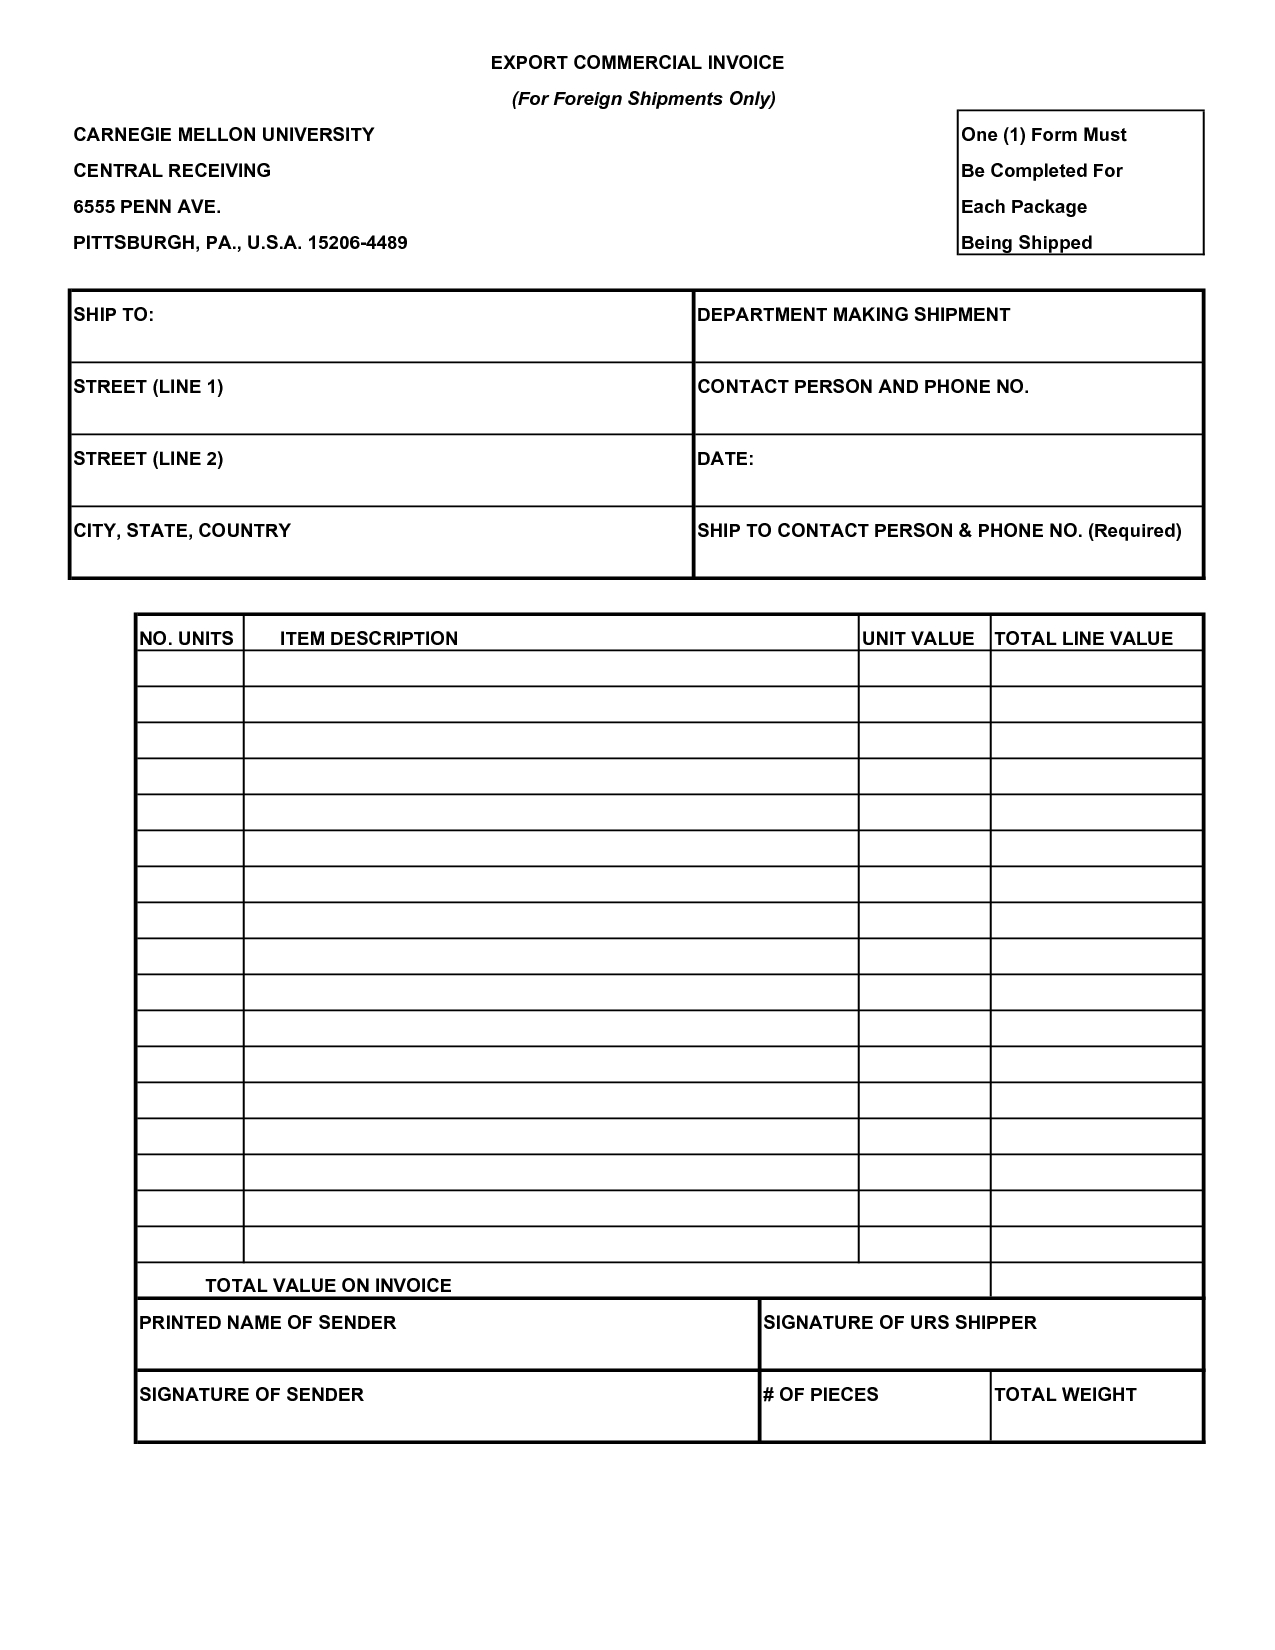 export-commercial-invoice-template-invoice-template-ideas